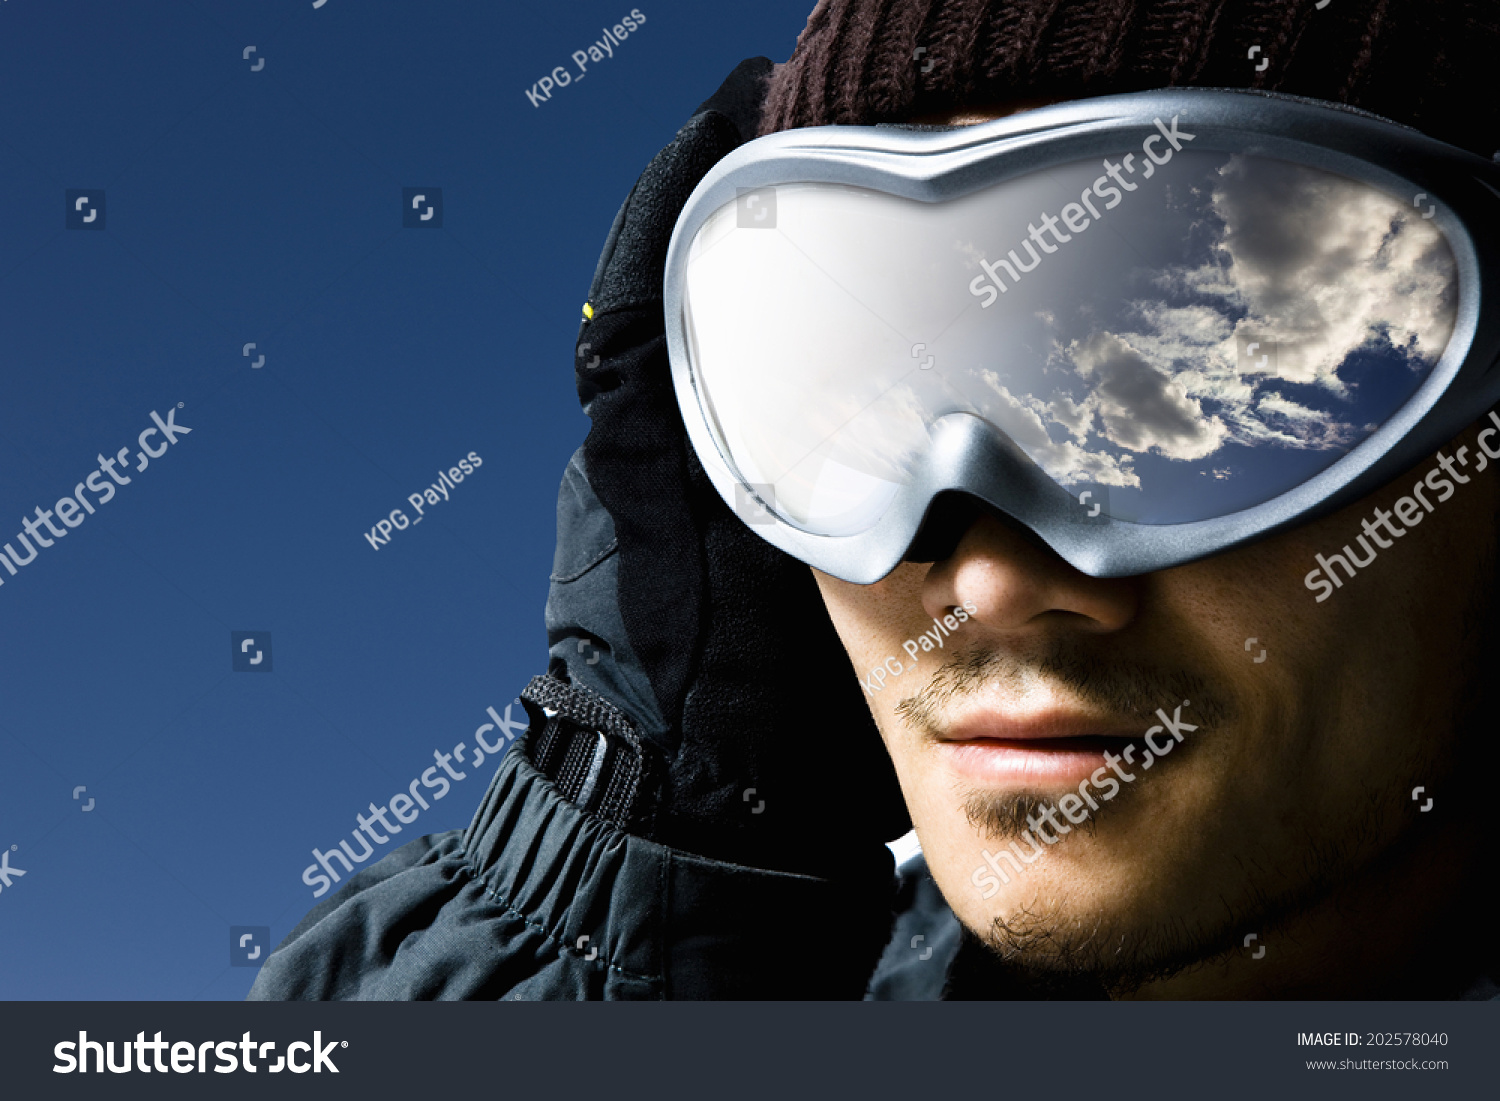 An Image of Snowboard #202578040